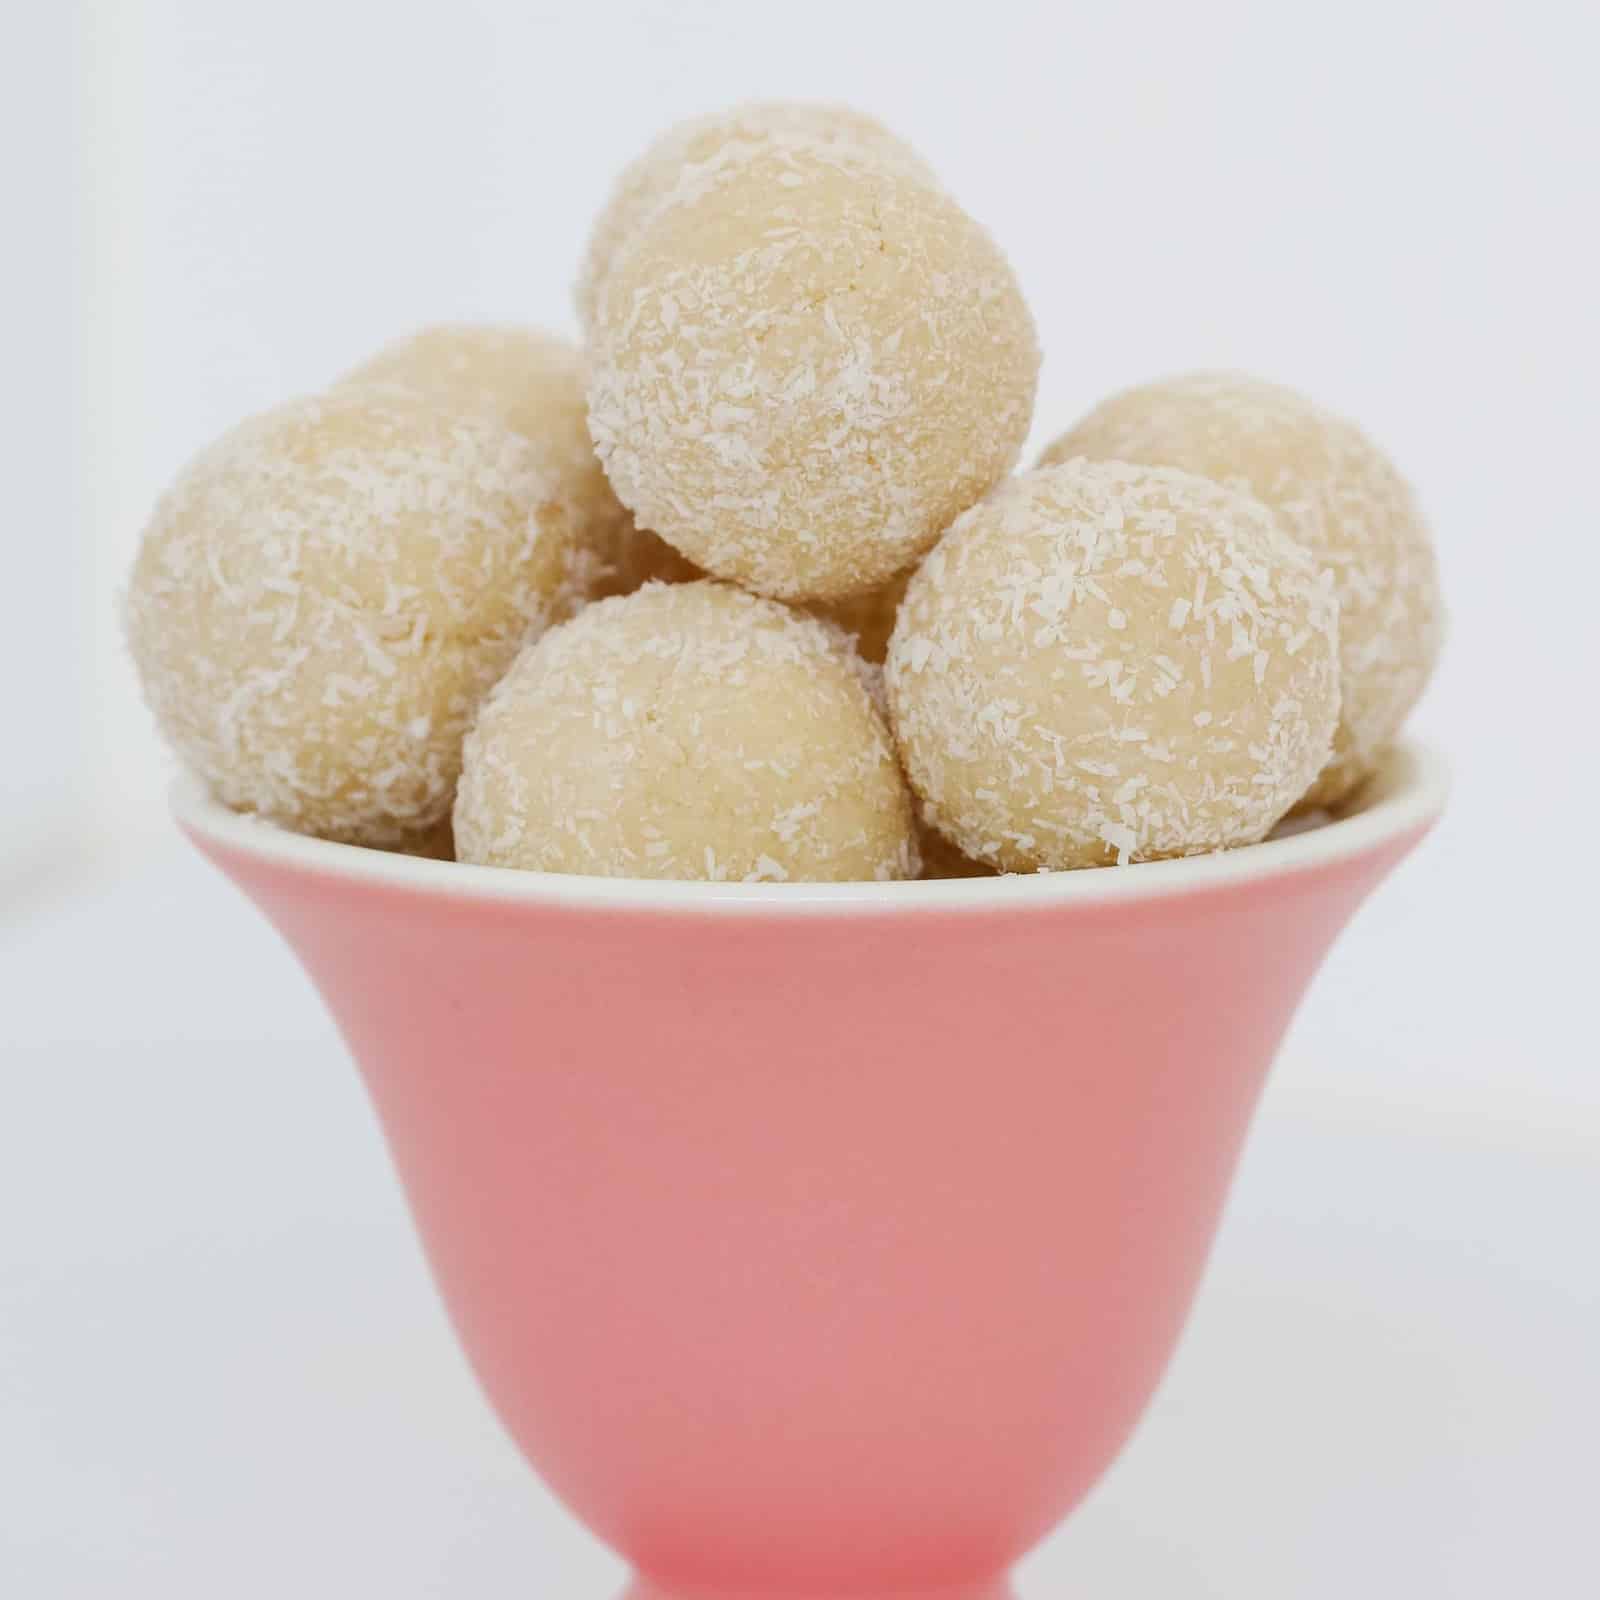 The ultimate White Chocolate Tim Tam Balls made from just 3 ingredients in less than 10 minutes.. the perfect cheeky dessert or party food treat!